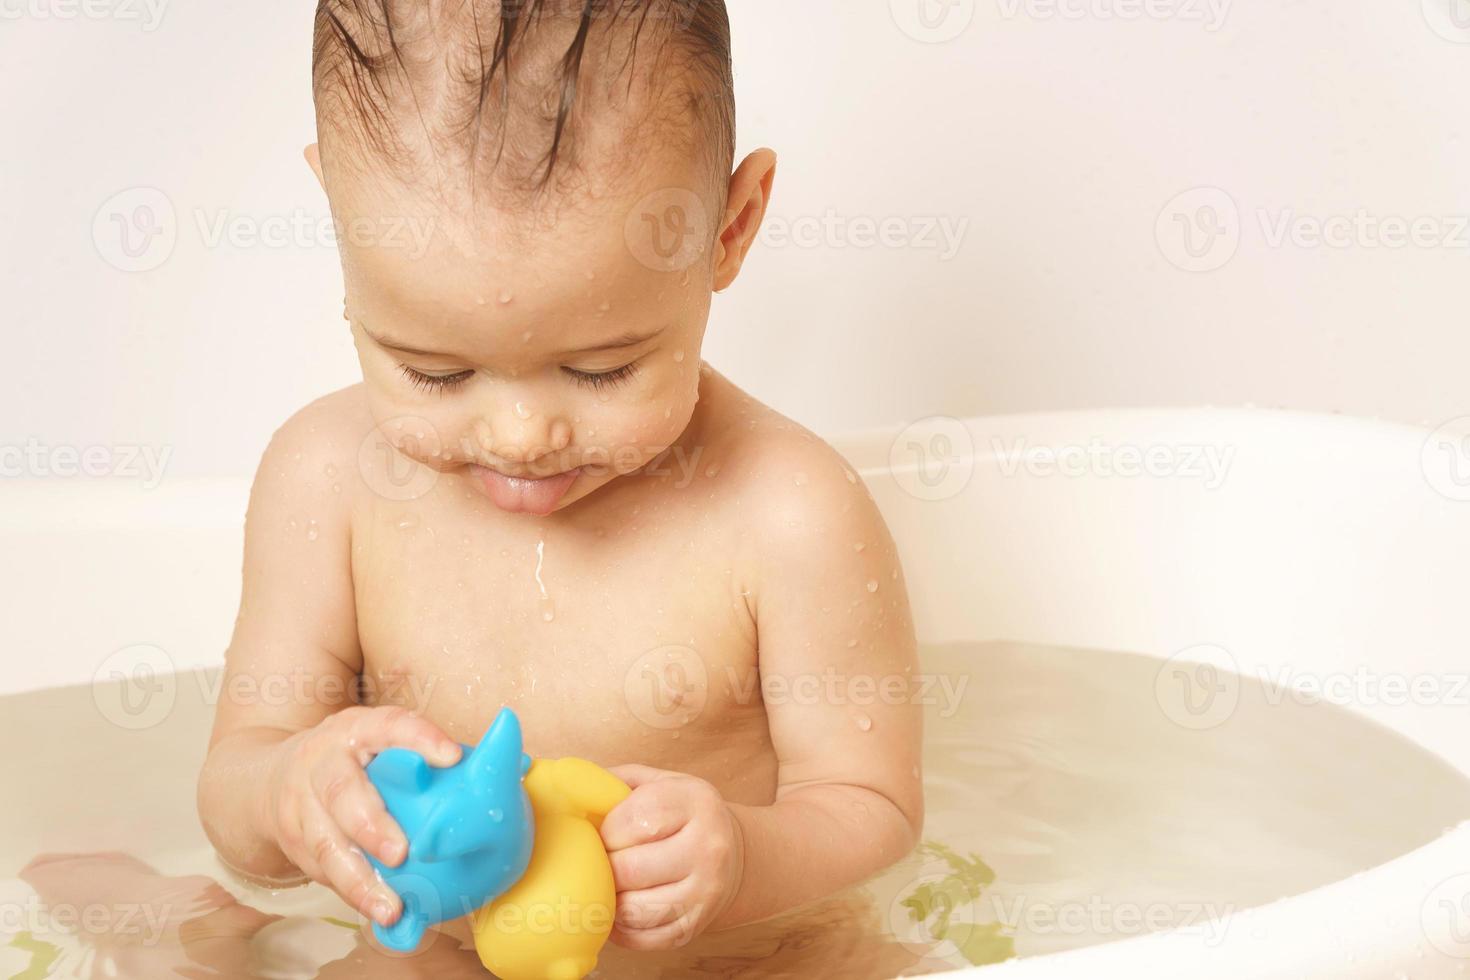 Little boy playing with rubber toys while taking a bath. photo